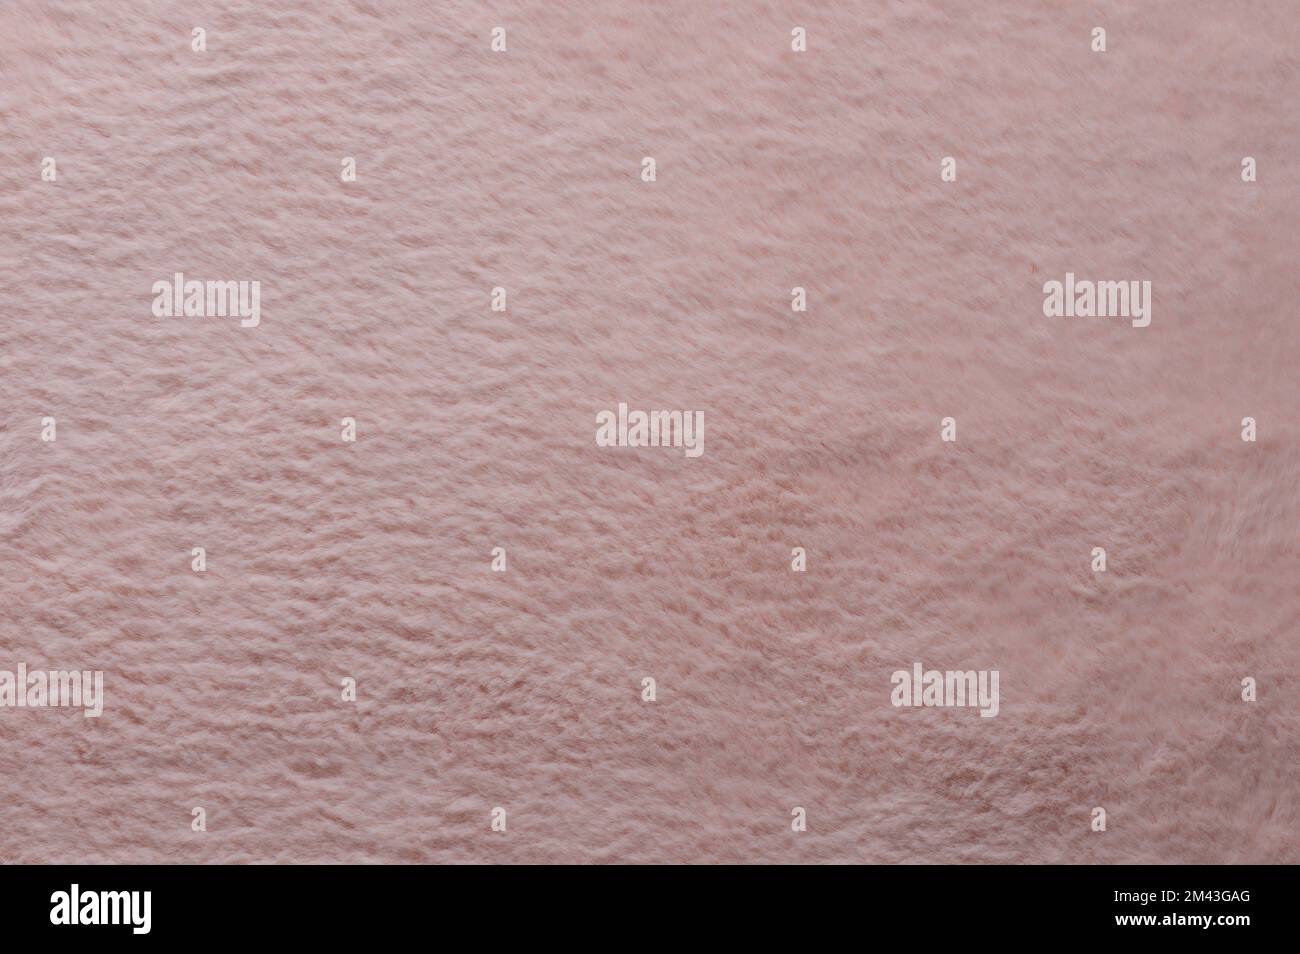 Pink soft fluffy texture background macro close up view Stock Photo